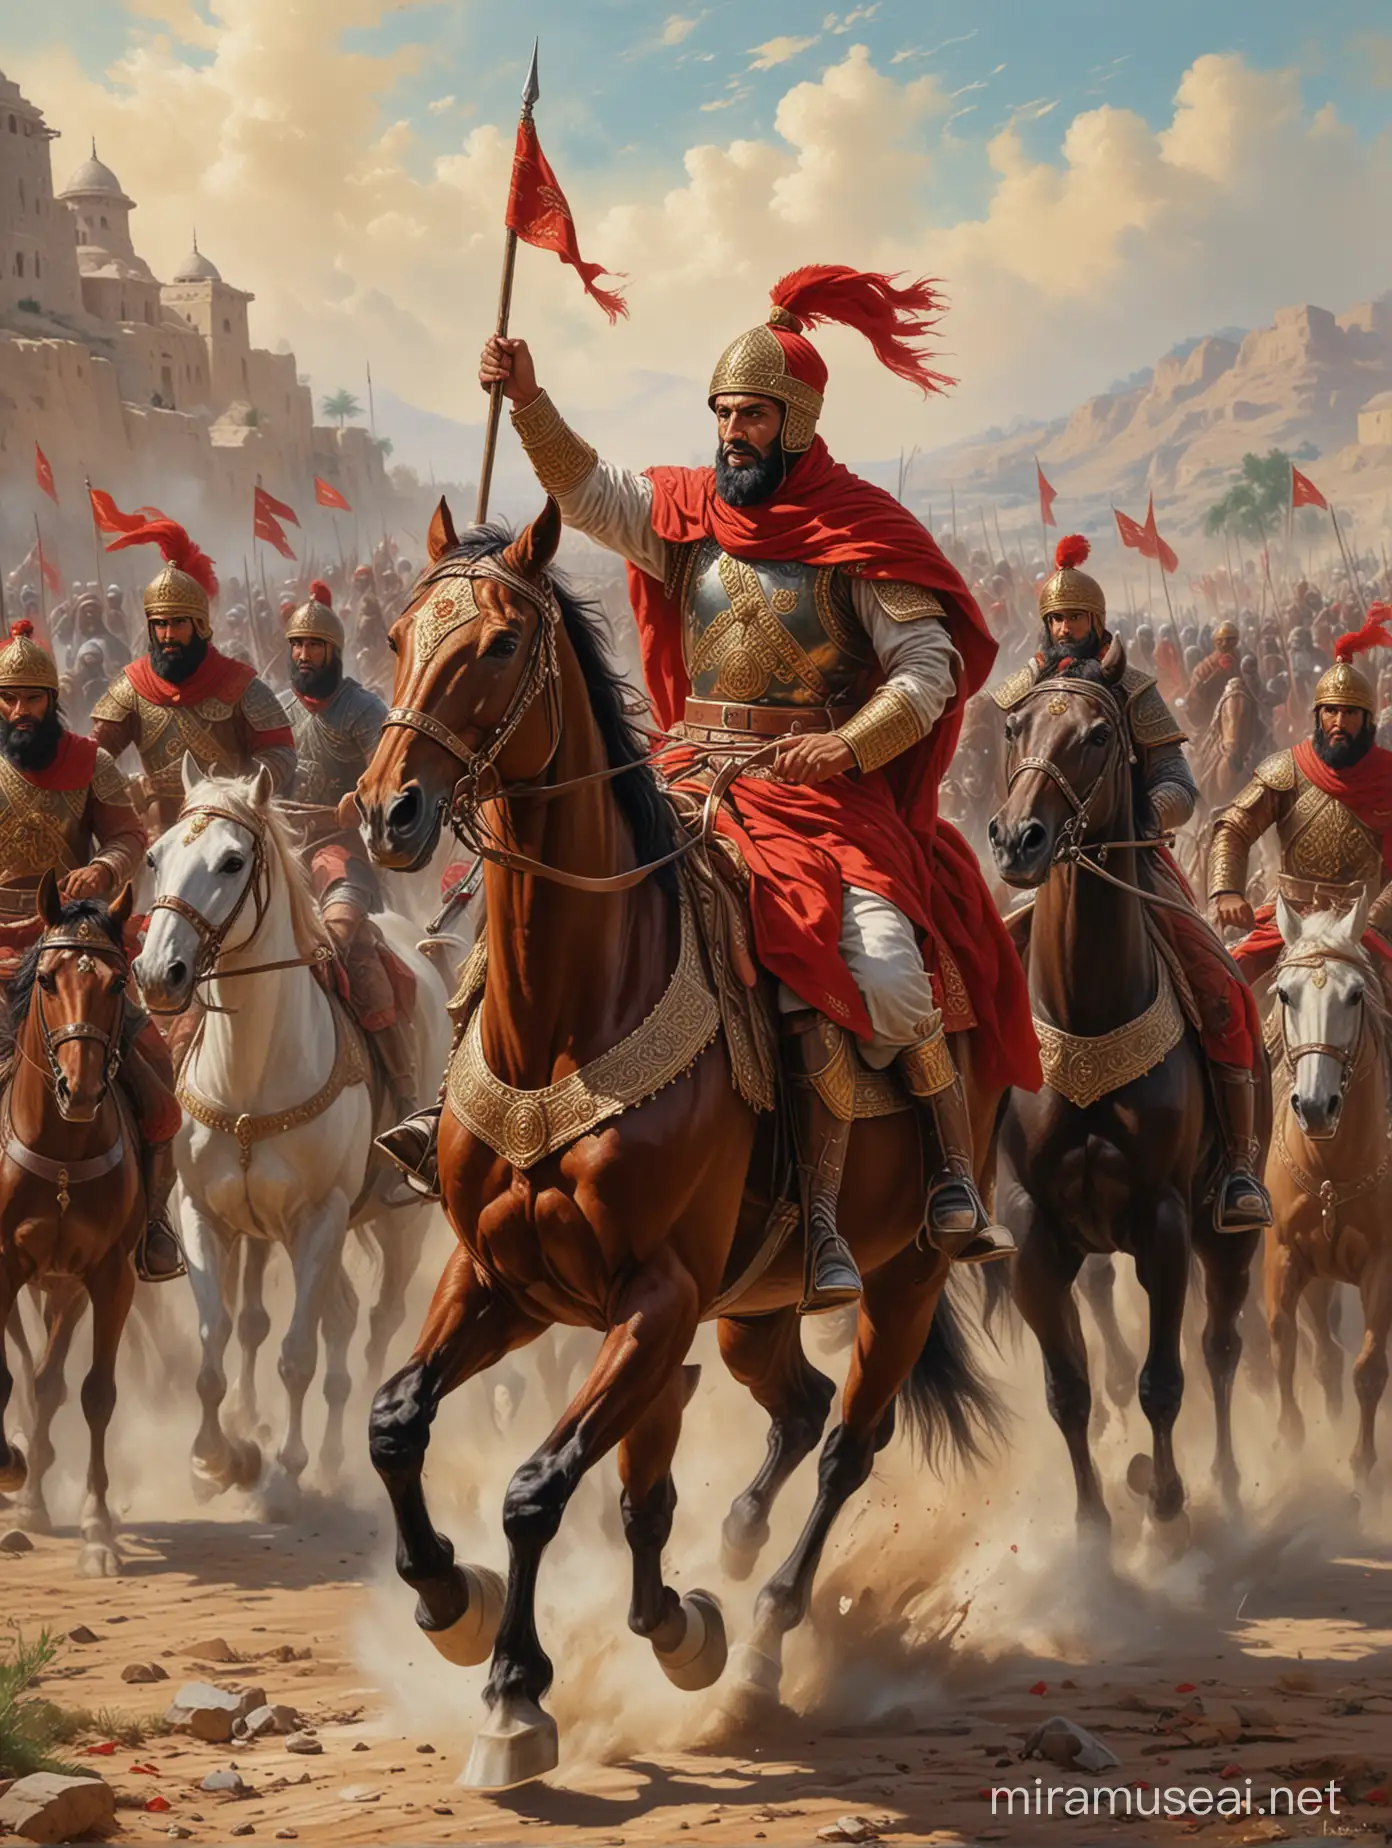 Muslim commanders, wearing red helmets and armor, are riding horses into battle, oil painting, impasto style